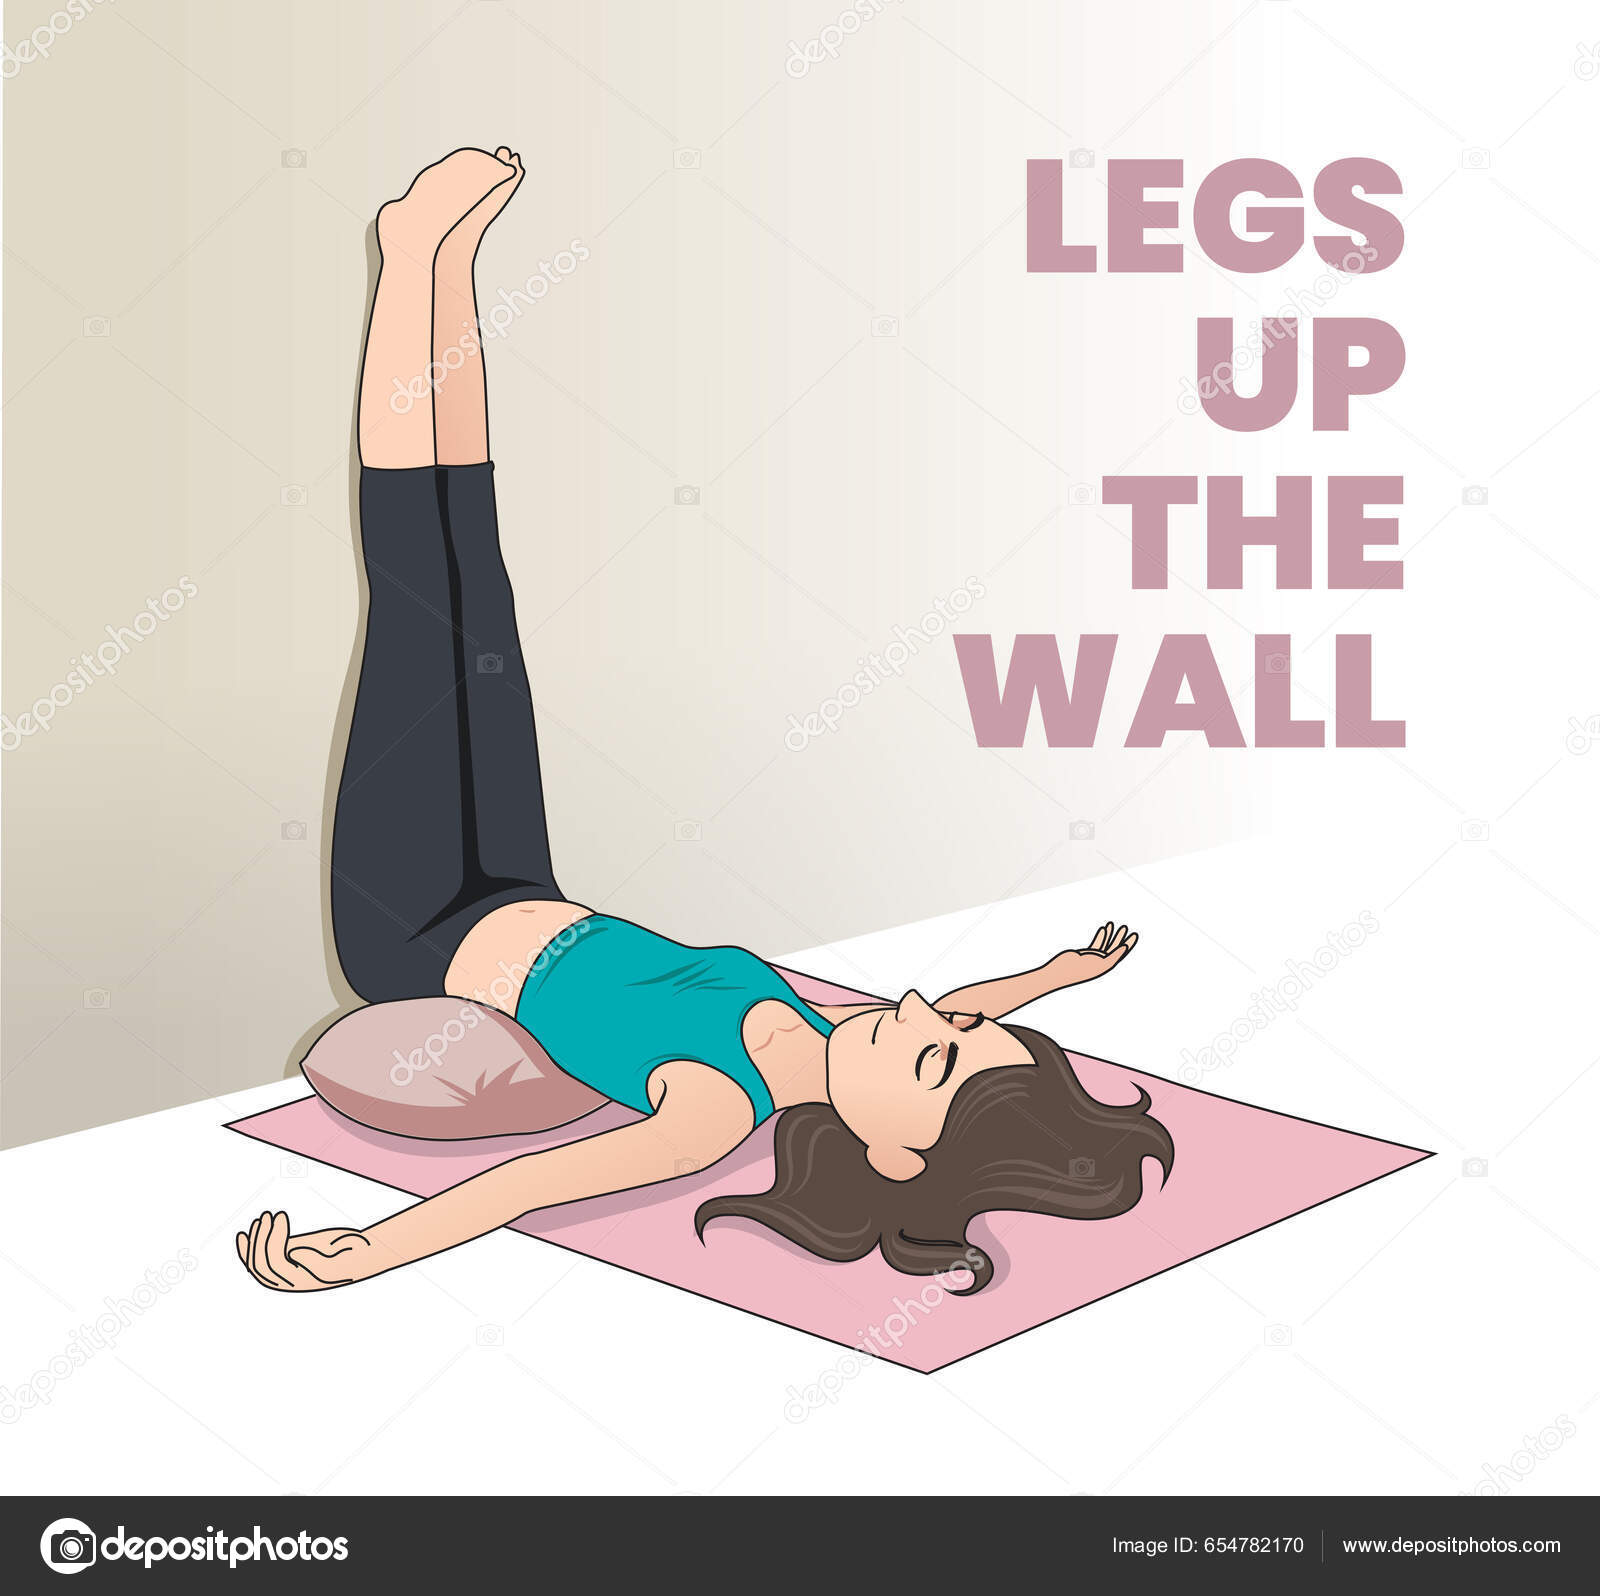 Kstar Events - Legs Up the Wall Pose (or Viparita Karani) is a restorative  yoga posture that allows the mind and the body to relax, relieving stress  and tension. It is one